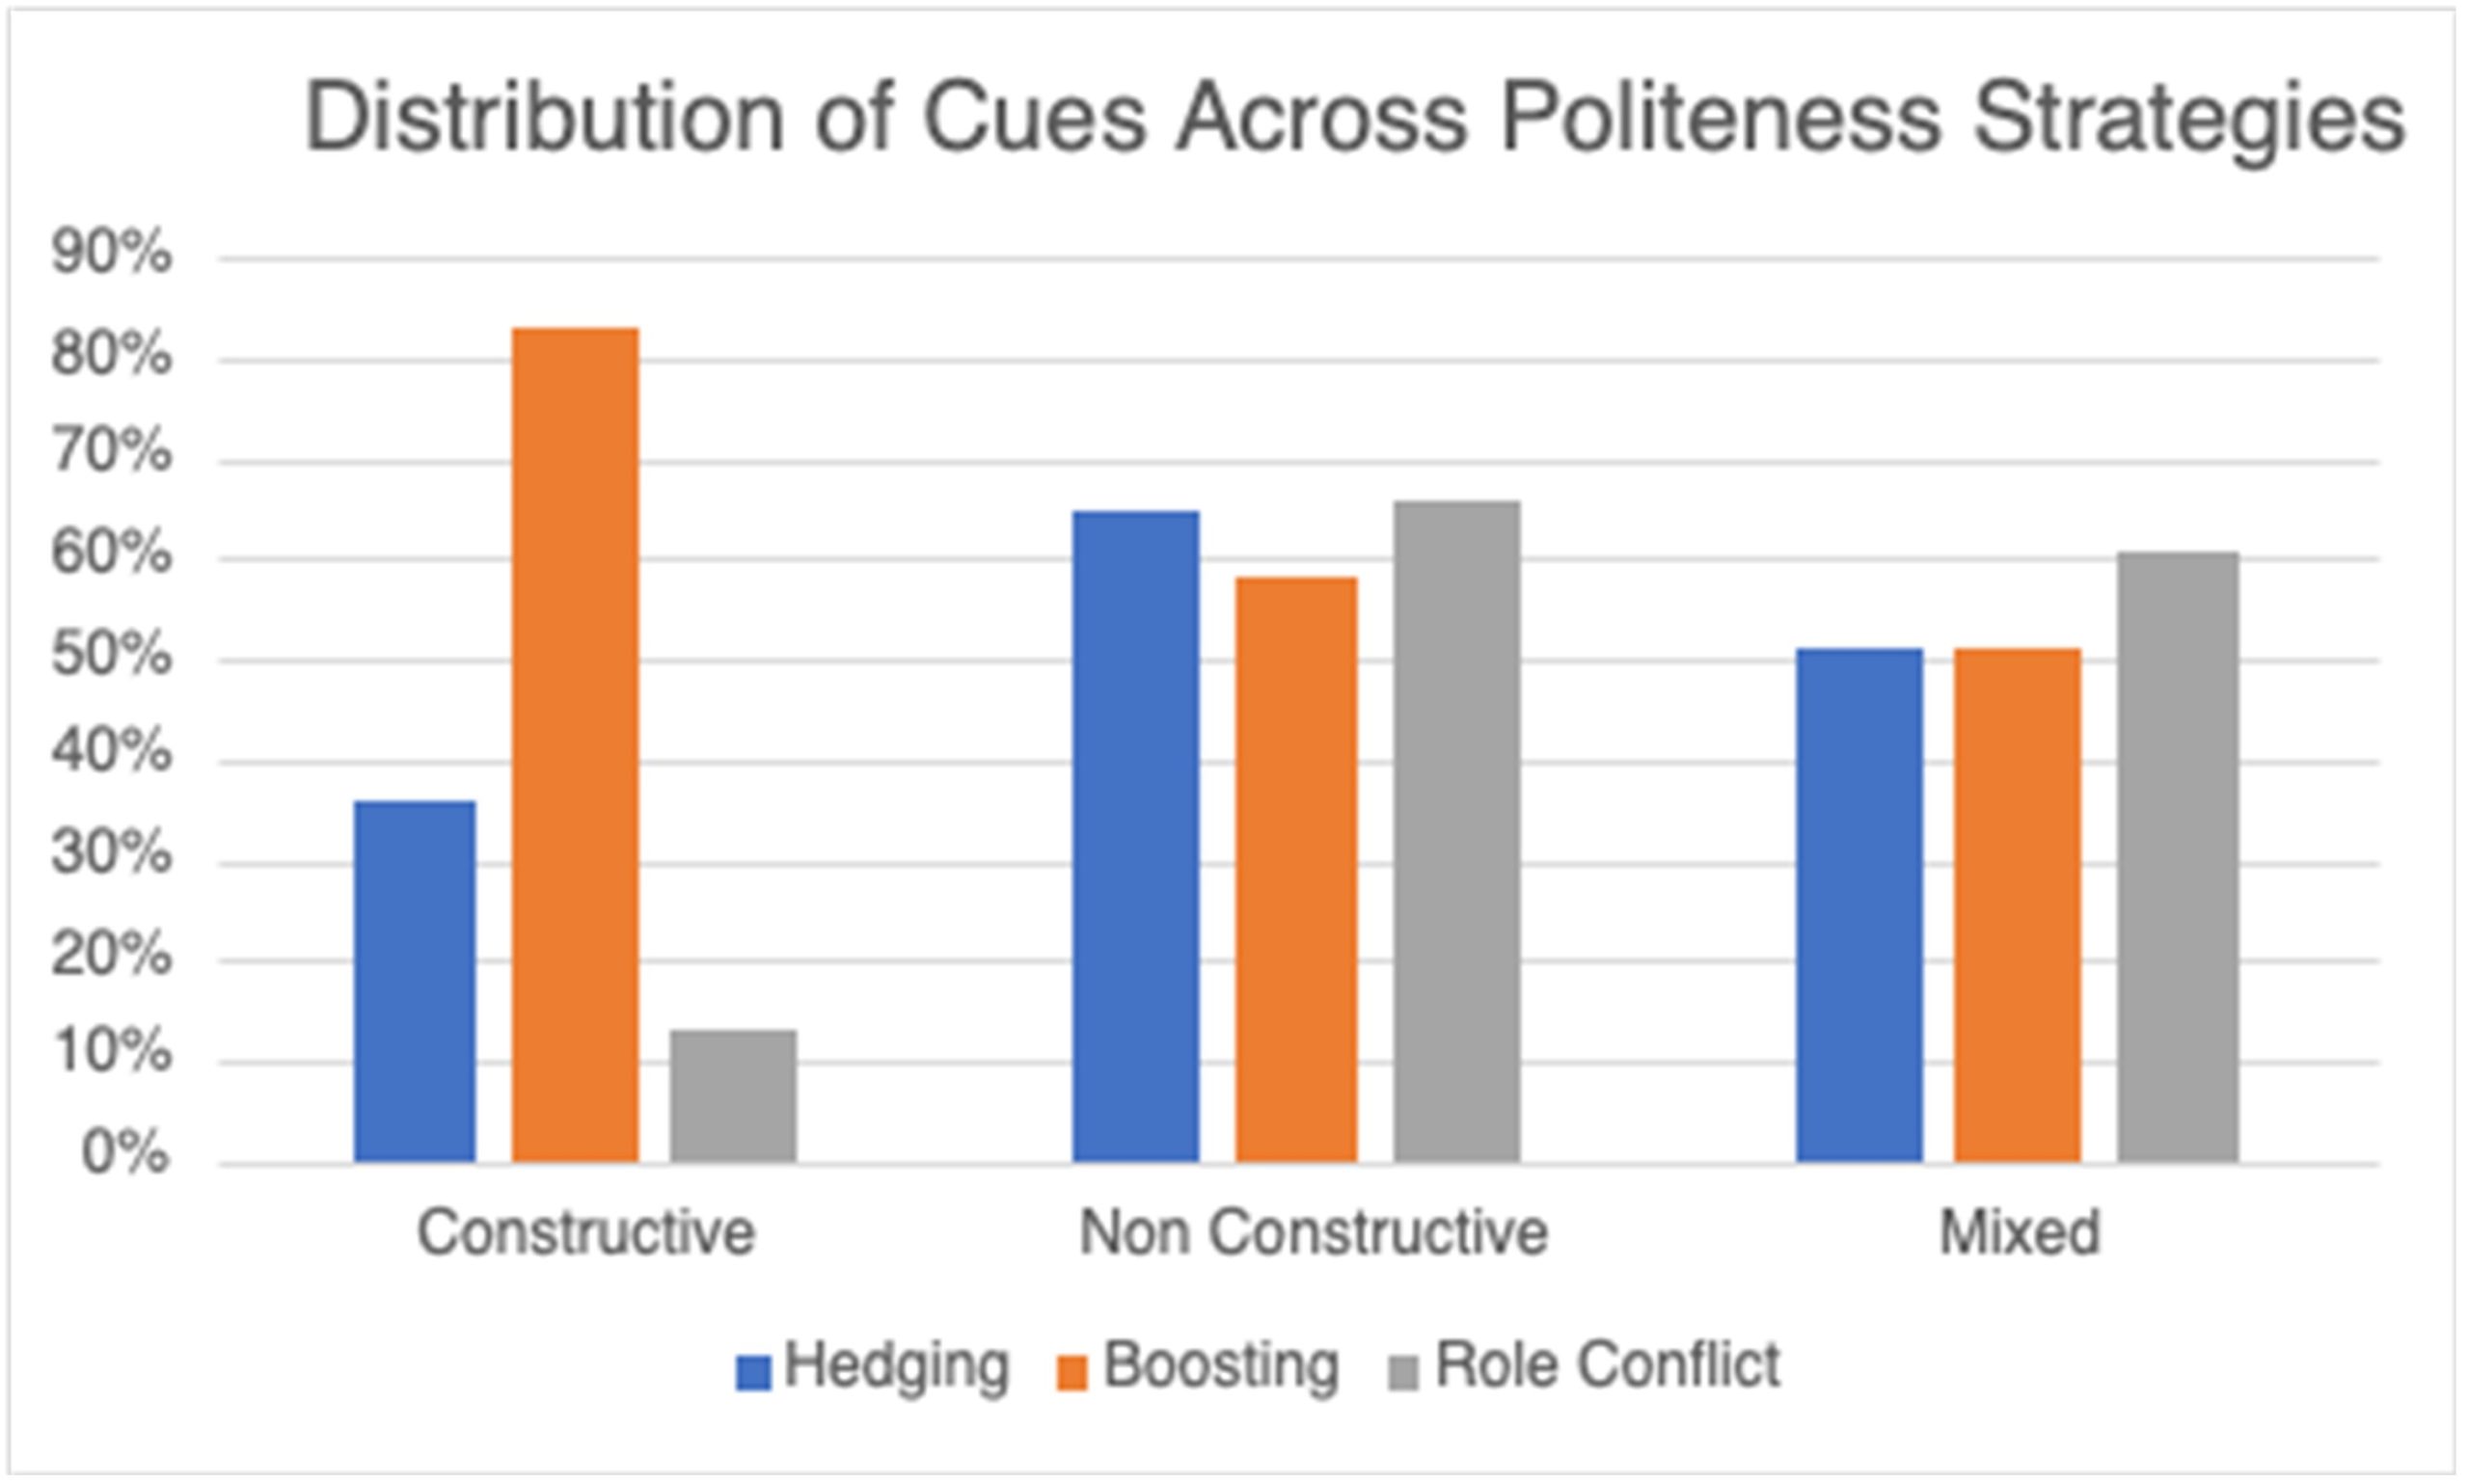 Bar graph showing distribution of linguistic and thematic cues across politeness strategies including constructive, non-constructive and mixed. Non-constructive and mixed are about the same percentage of hedging, boosting, and role conflict comments while constructive has far more boosting comments than the other two categories.